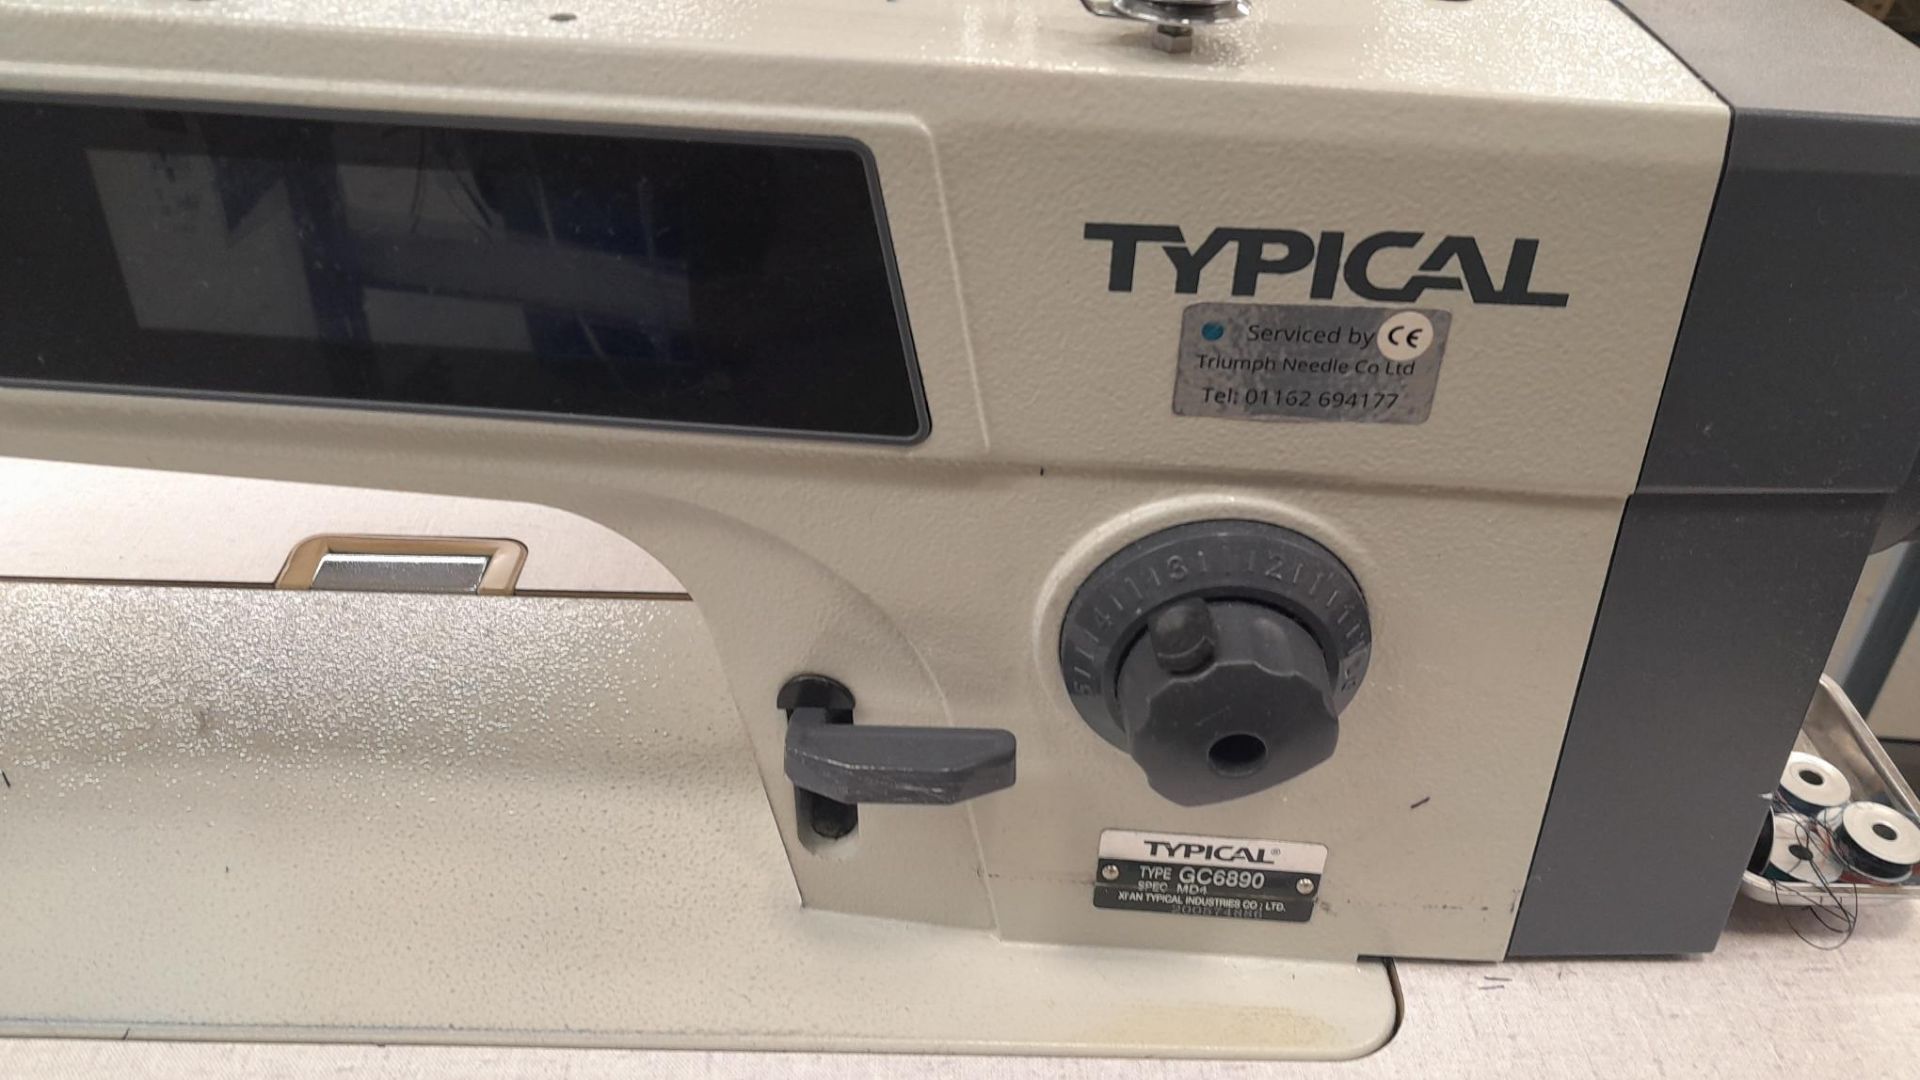 Typical GC6890-MD4 Flatbed Sewing Machine Serial Number 200574886, 240v - Image 3 of 3